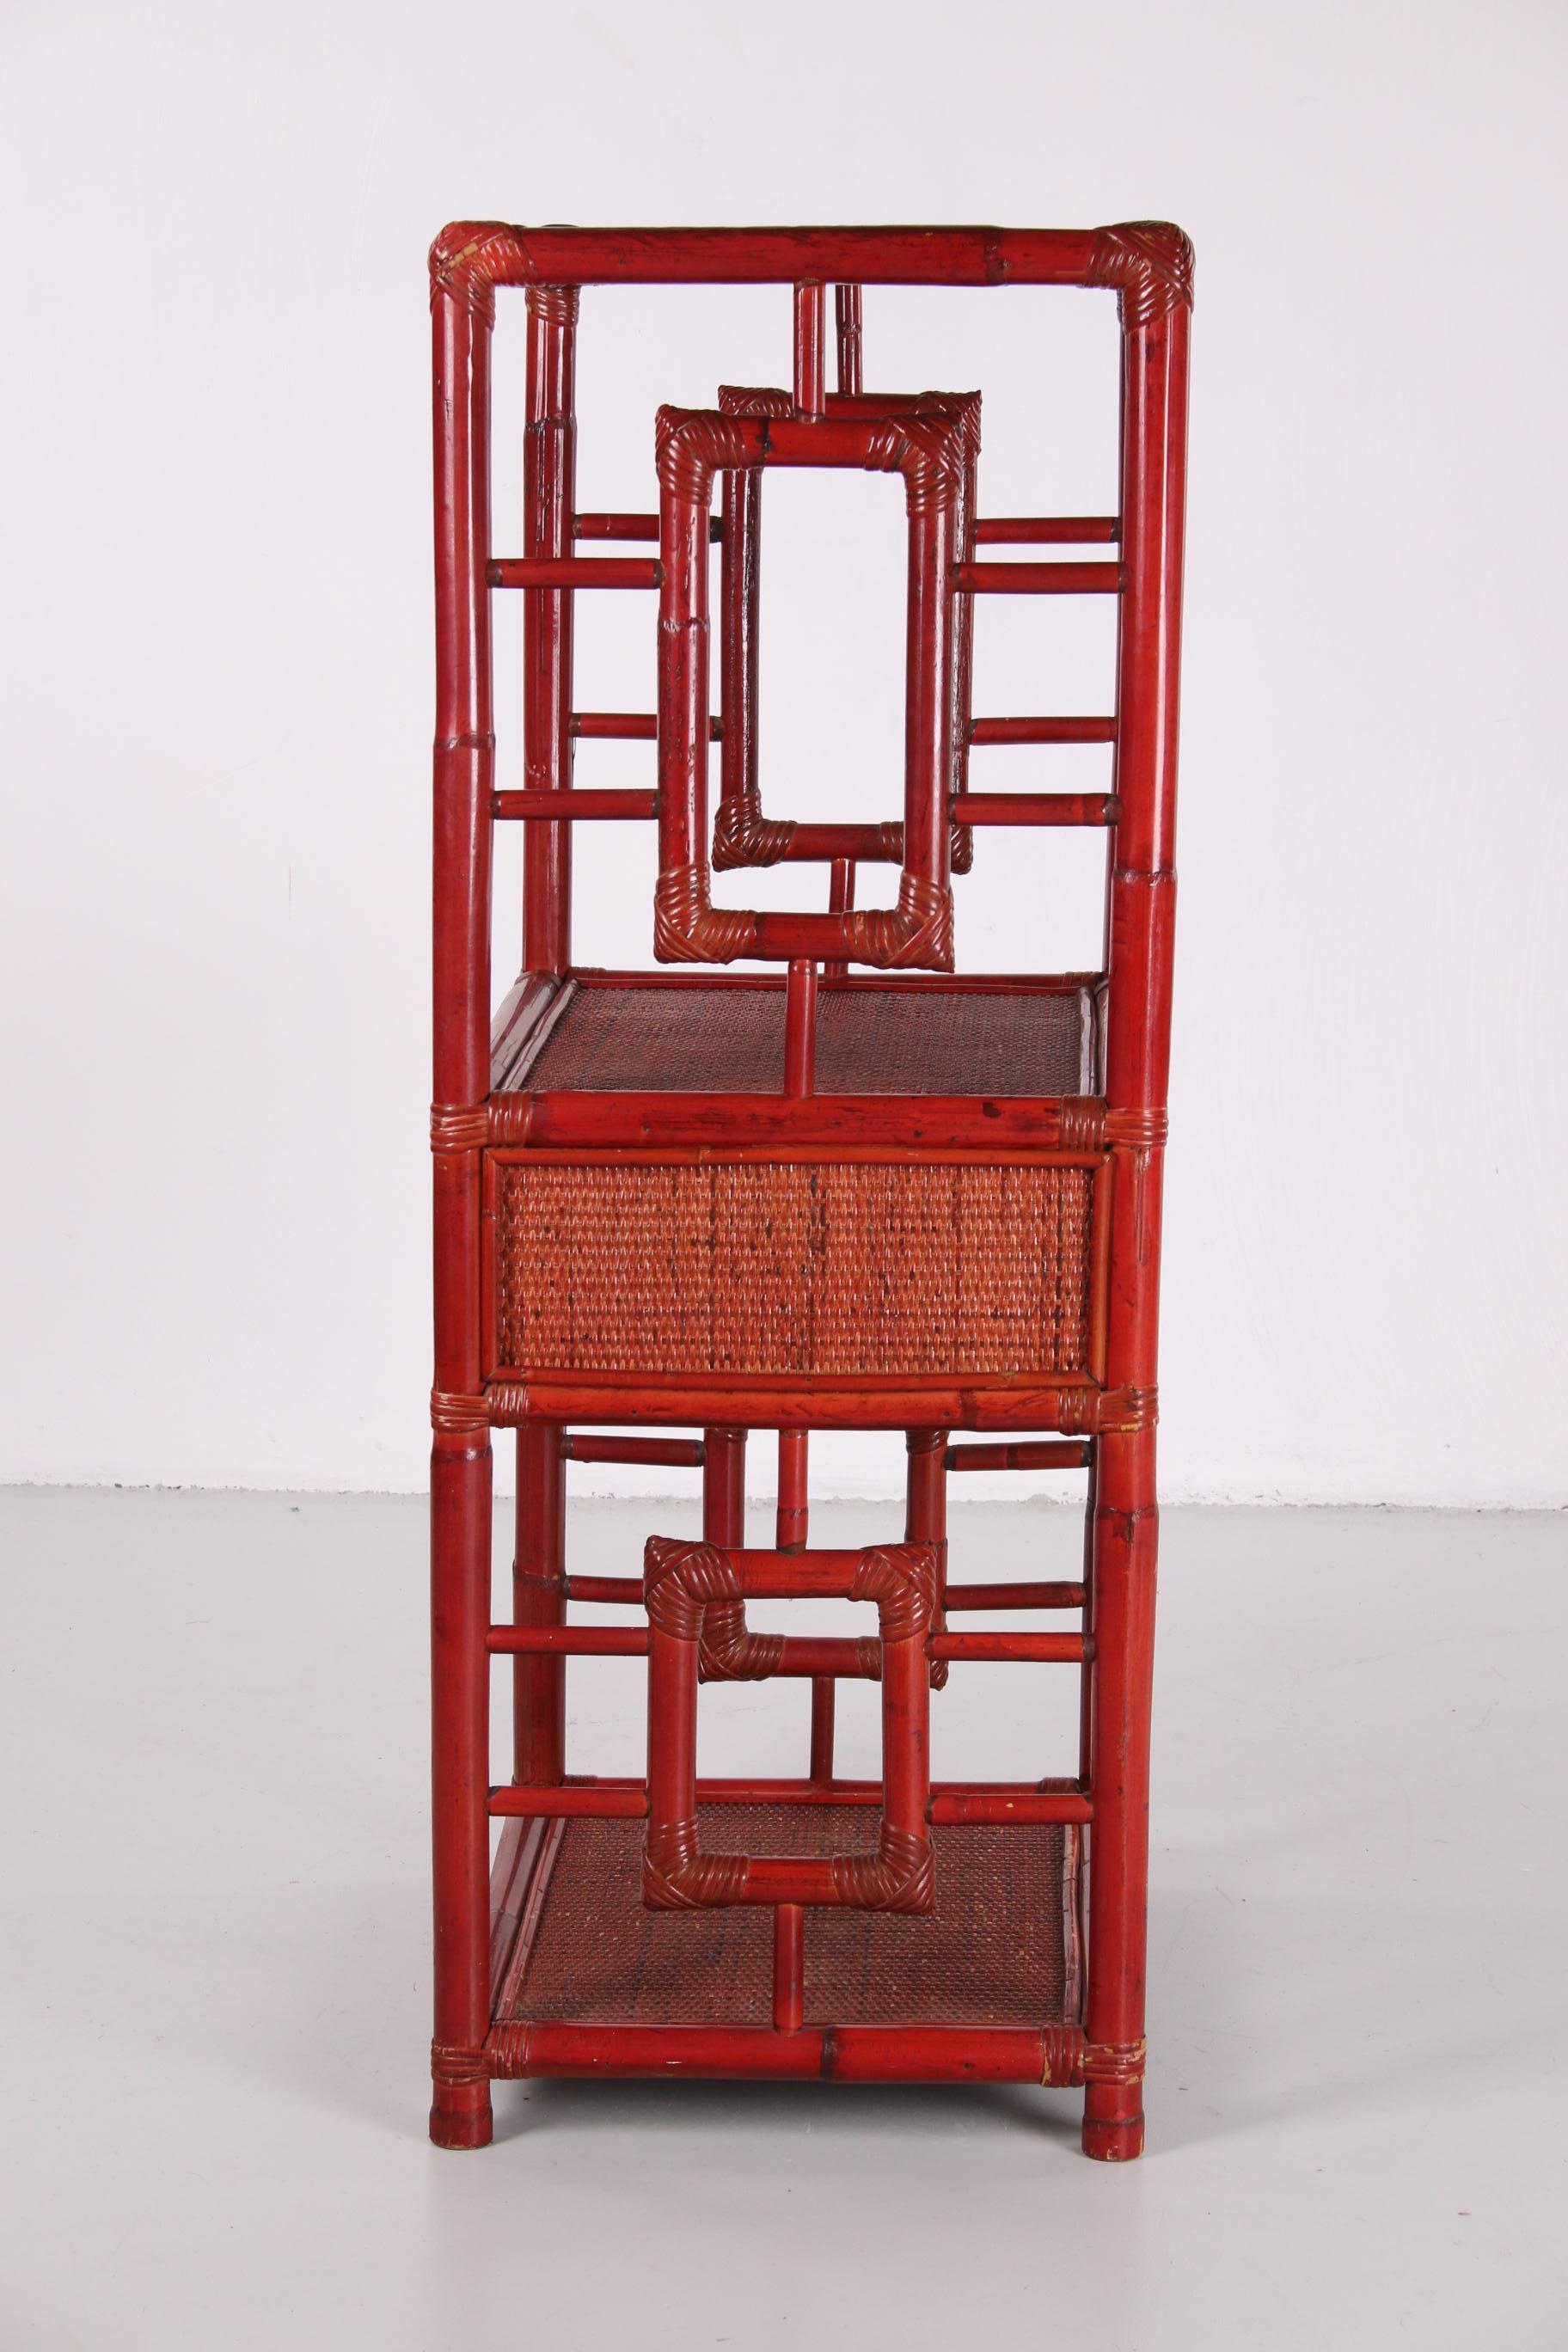 Rattan Chinese 19th Century Etagere or Room Divider Made of Bamboo, Old Red